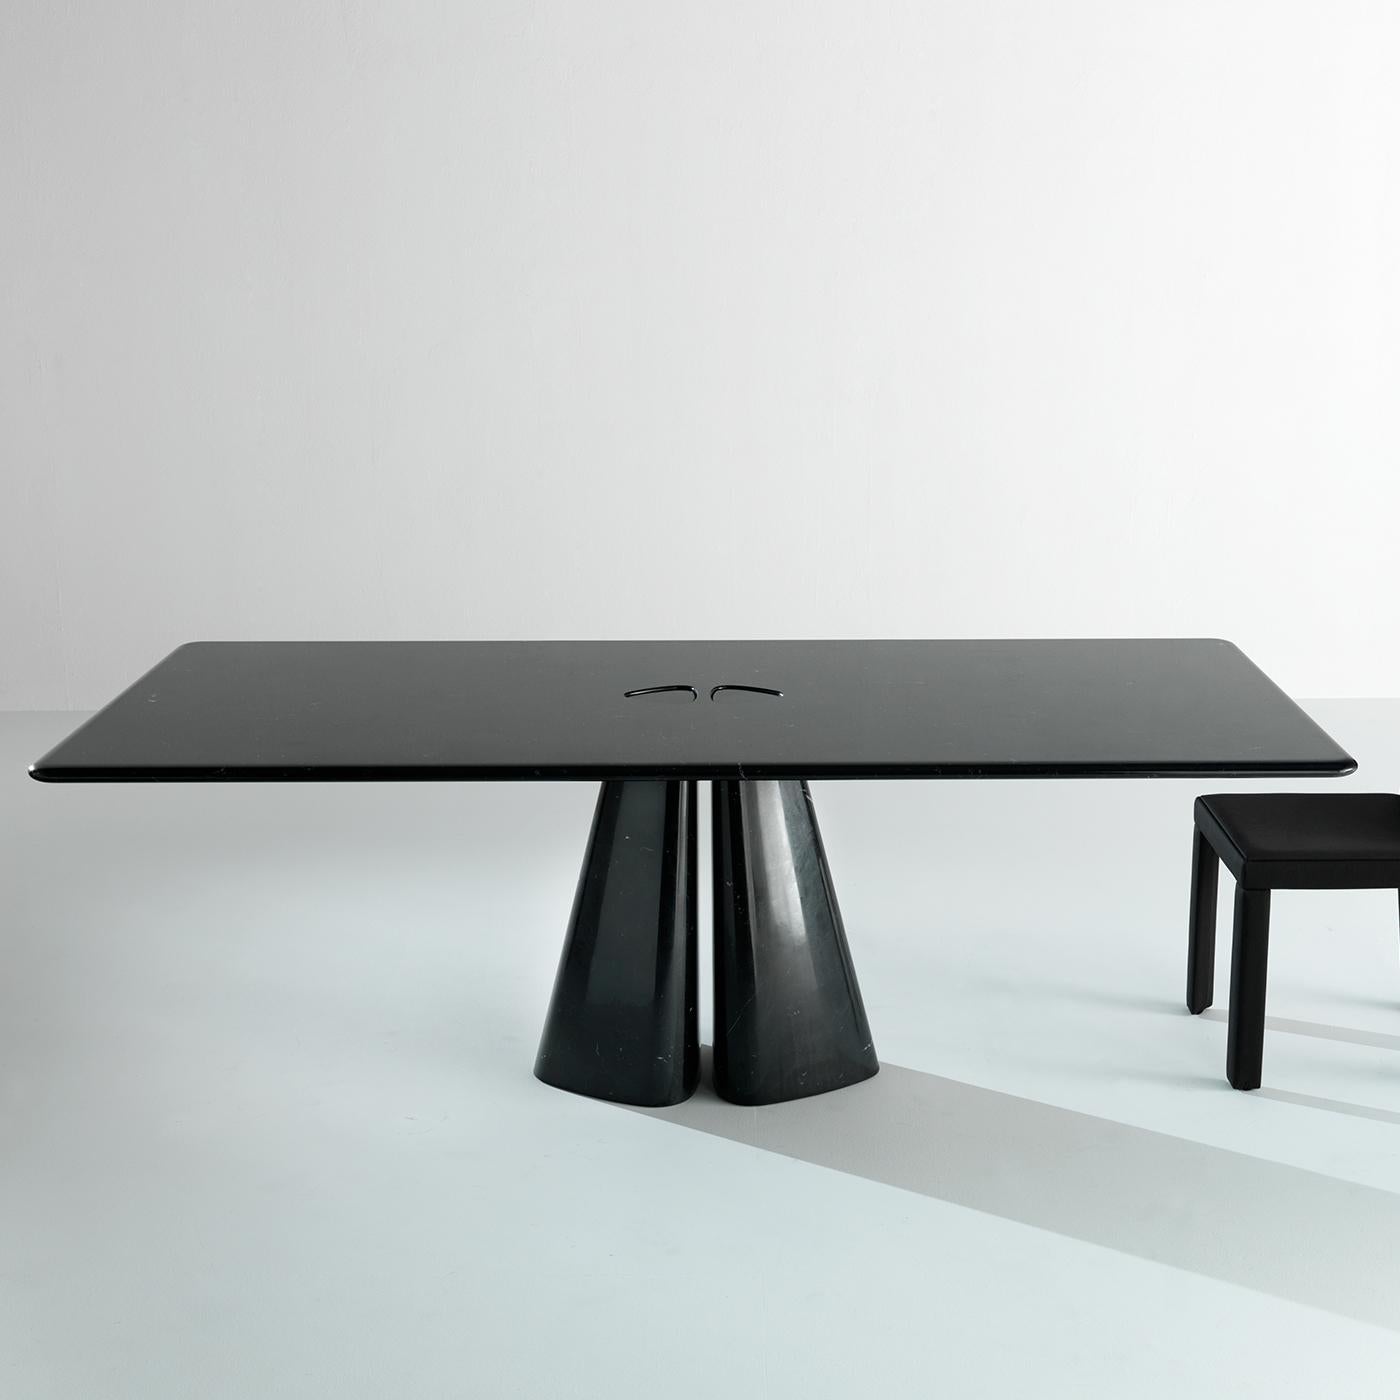 This stunning dining table is entirely made of black marble. A thick rectangular marble top with rounded edges is supported by a unique based formed by two thick angular blocks of the same marble as the top. This is a gorgeous piece that will be a